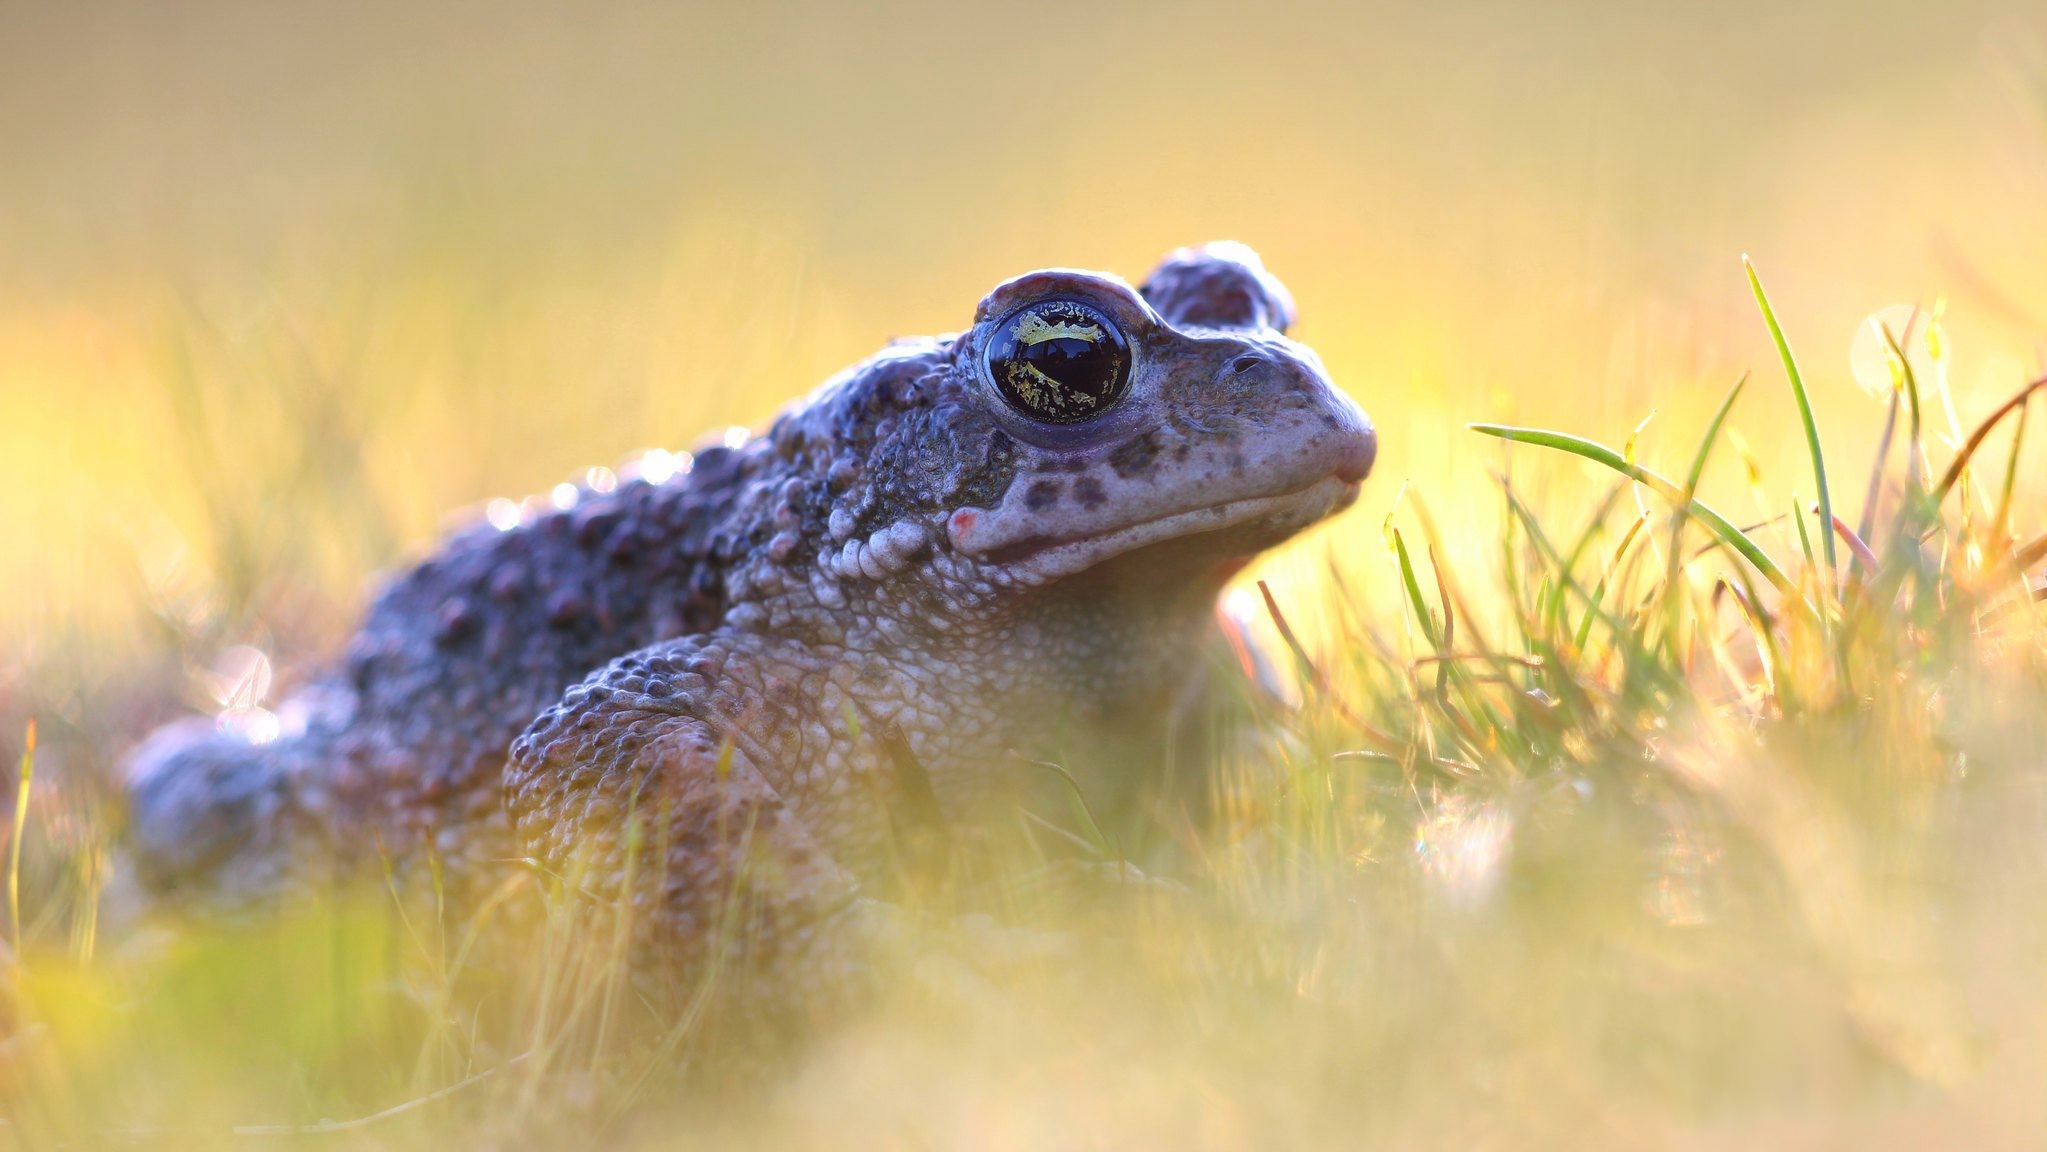 Toad wallpapers, Extensive collection, Toad species, Nature's beauty, 2050x1160 HD Desktop